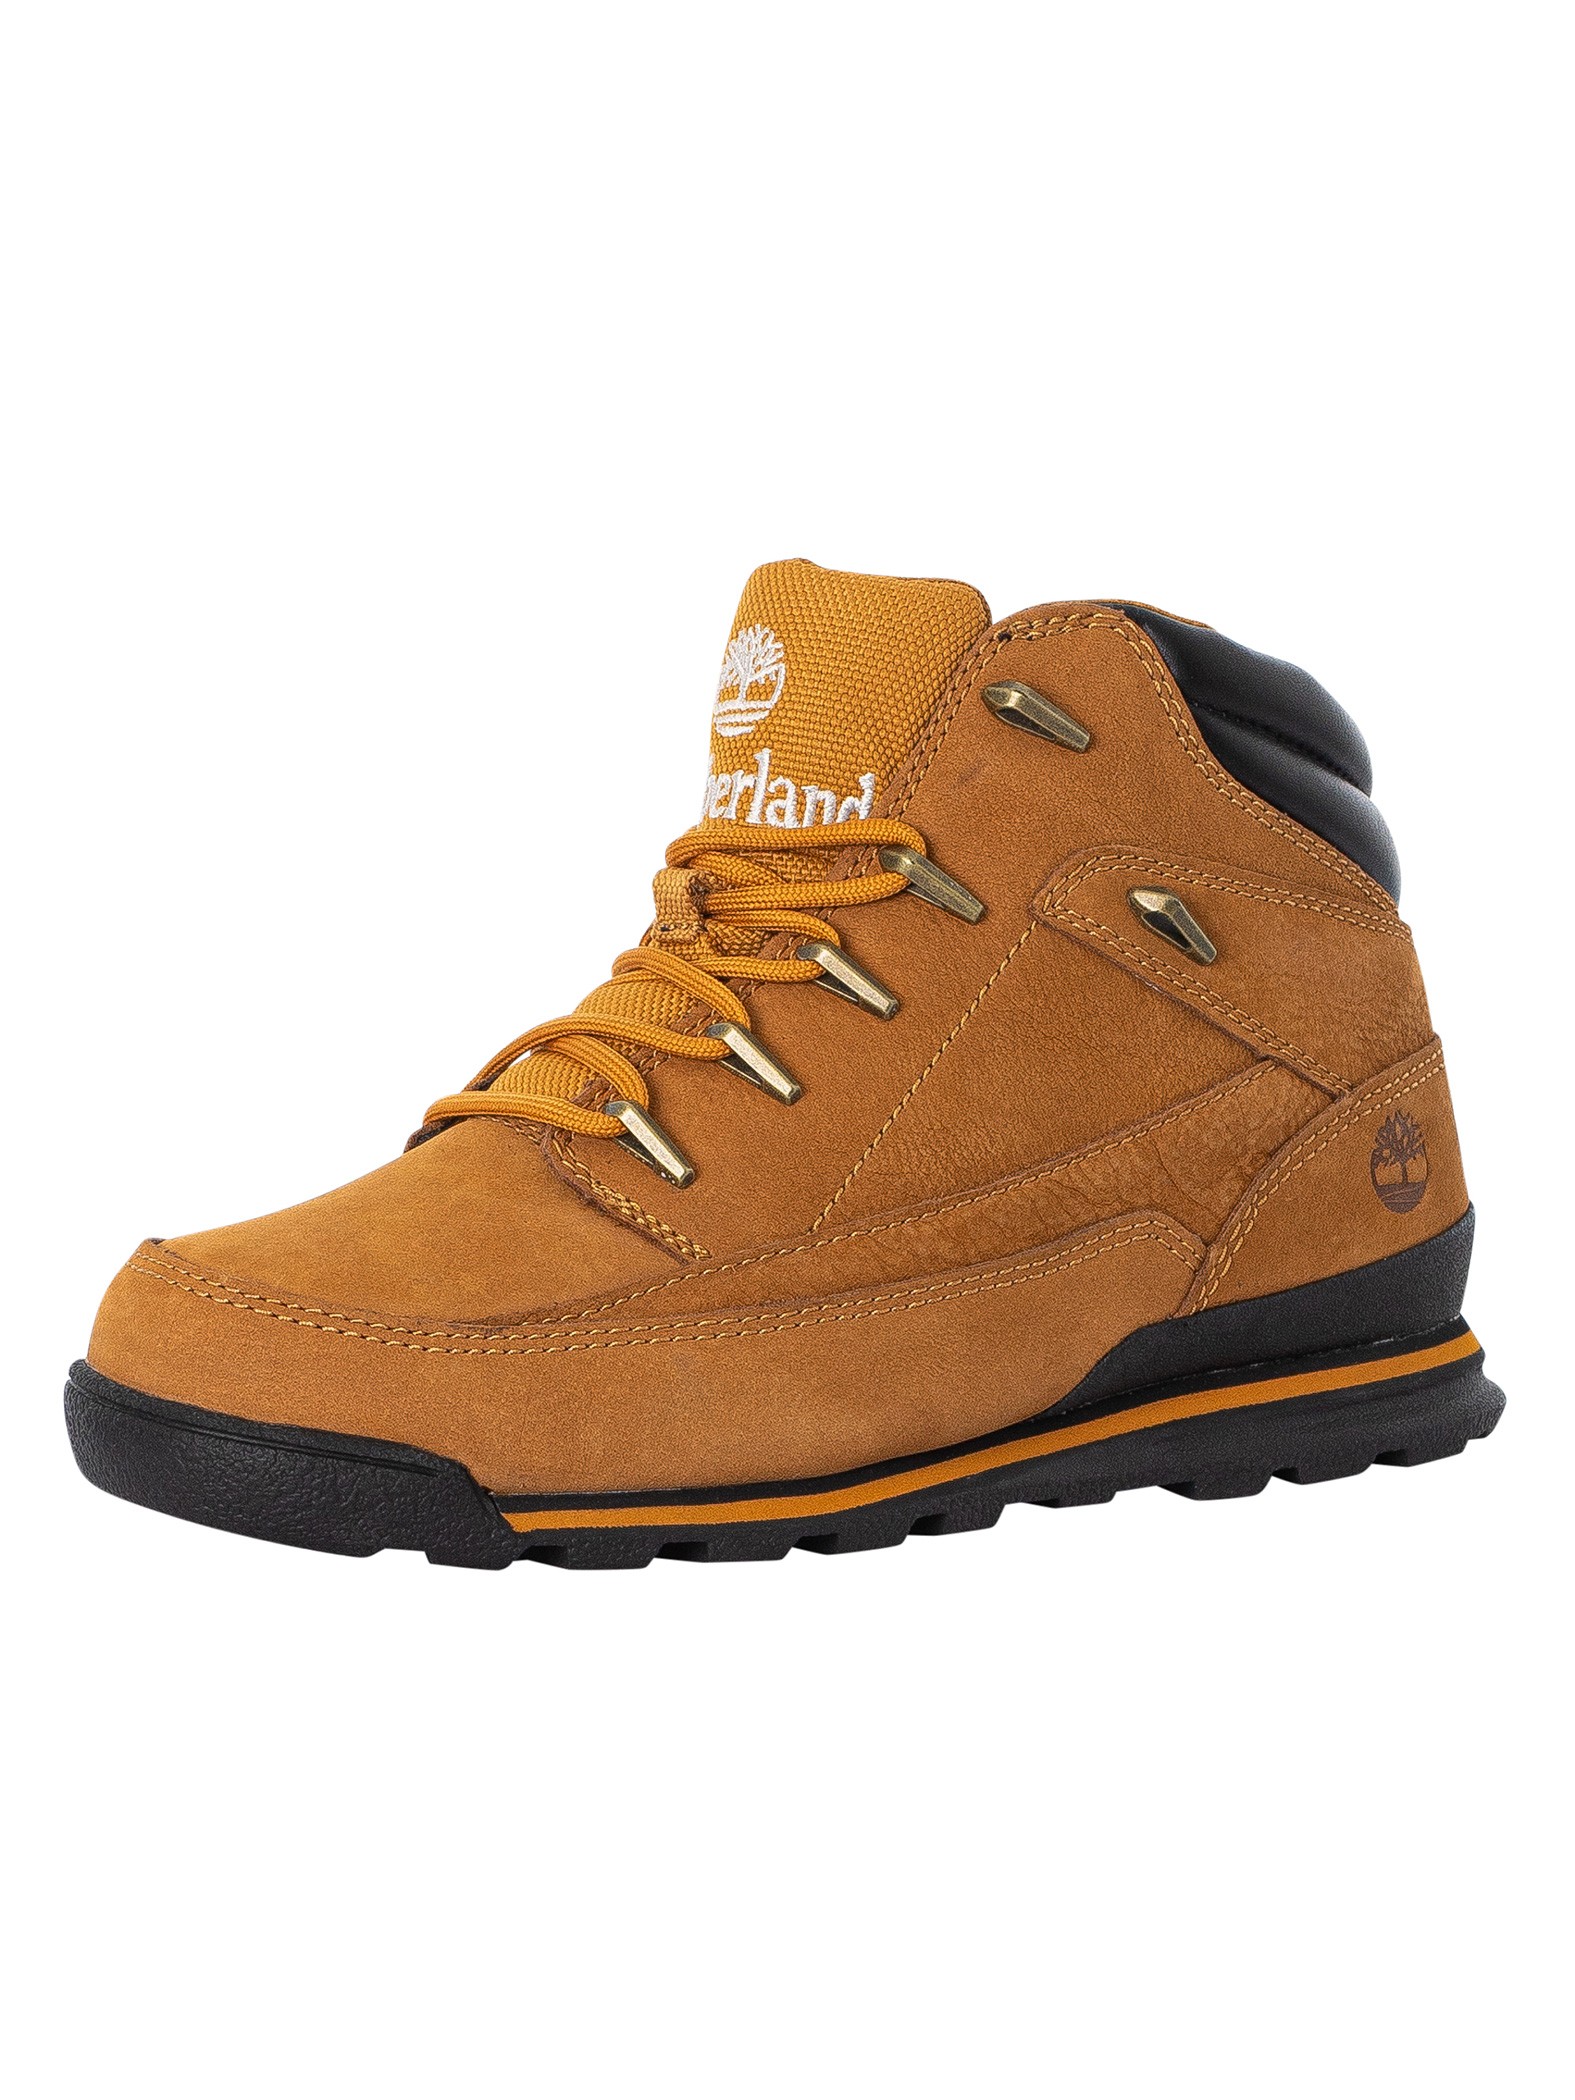 Euro Rock Mid Hiker Boots product